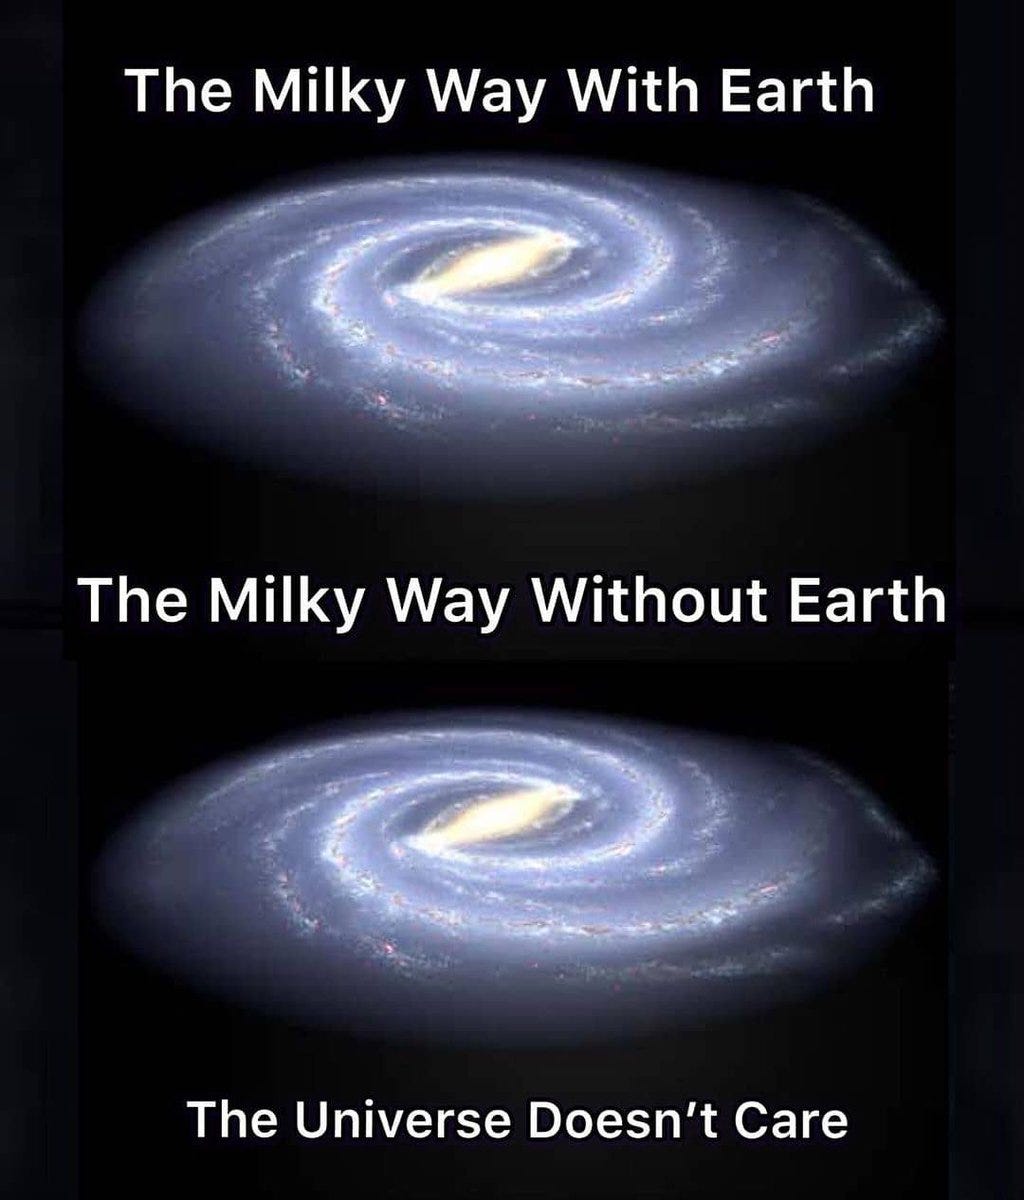 Amazing Astronomy on X: "The Milky Way without Earth!  https://t.co/hPJajIXzVv" / X